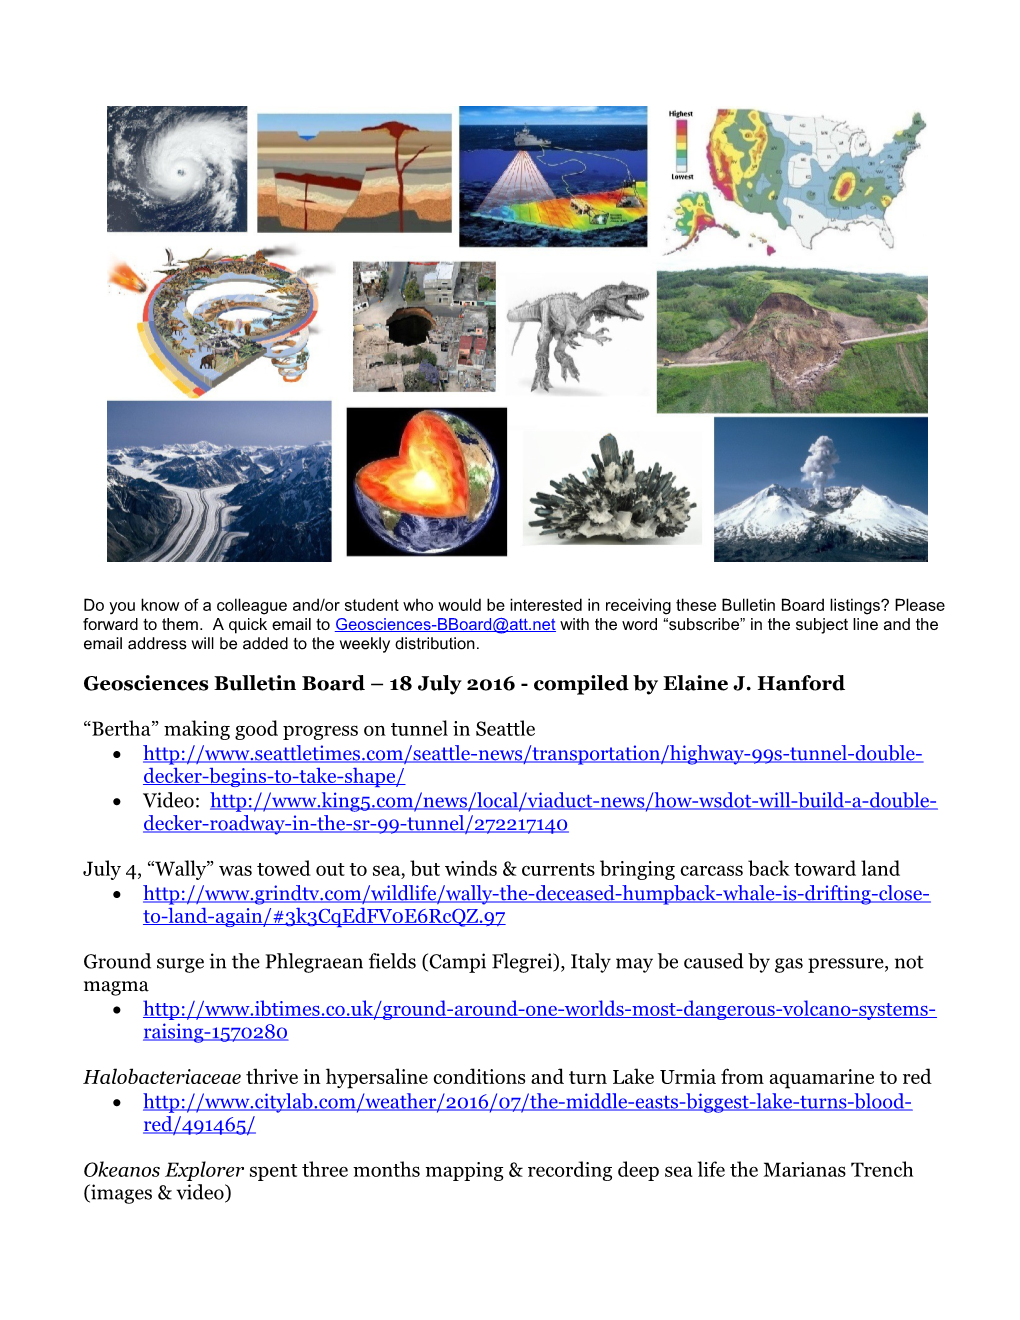 Geosciences Bulletin Board 18July 2016- Compiled by Elaine J. Hanford